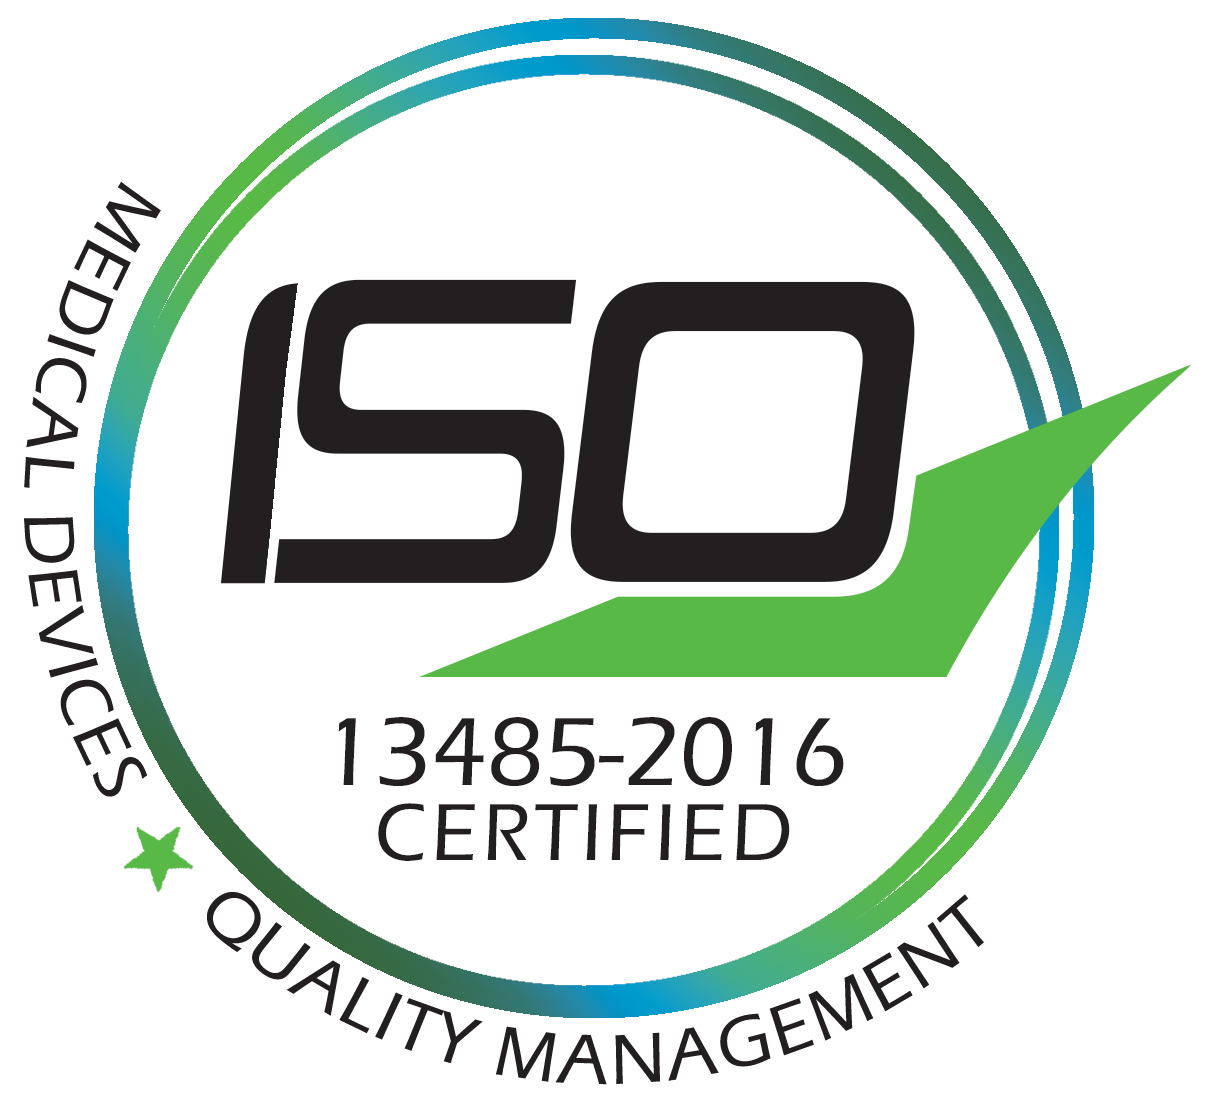 Iso 13485-2016 certified